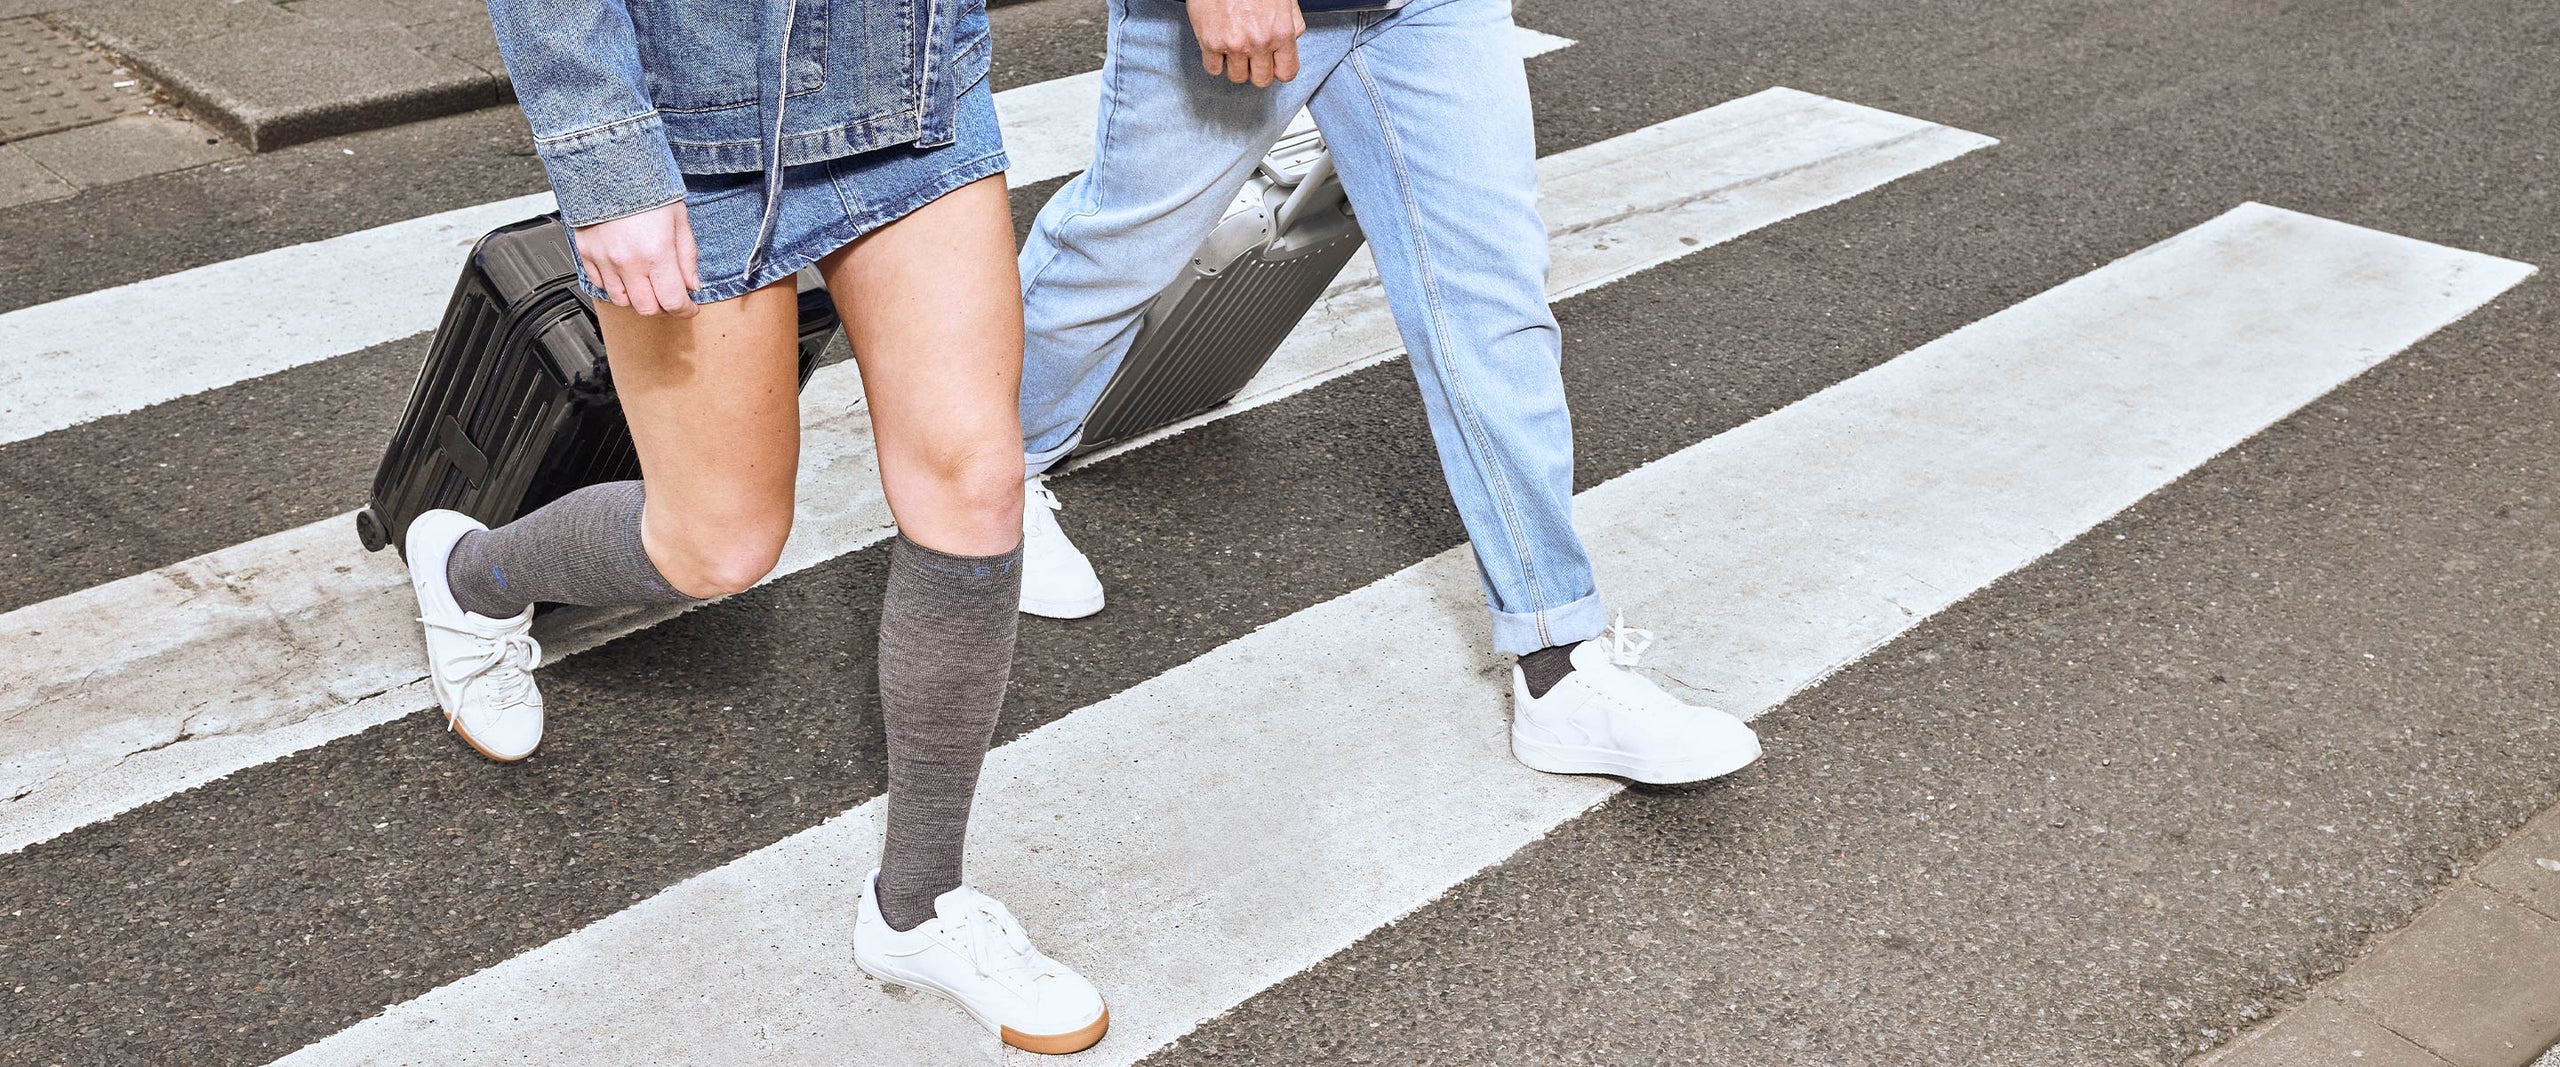 Two people walking with suitcases wearing white sneakers and grey socks.